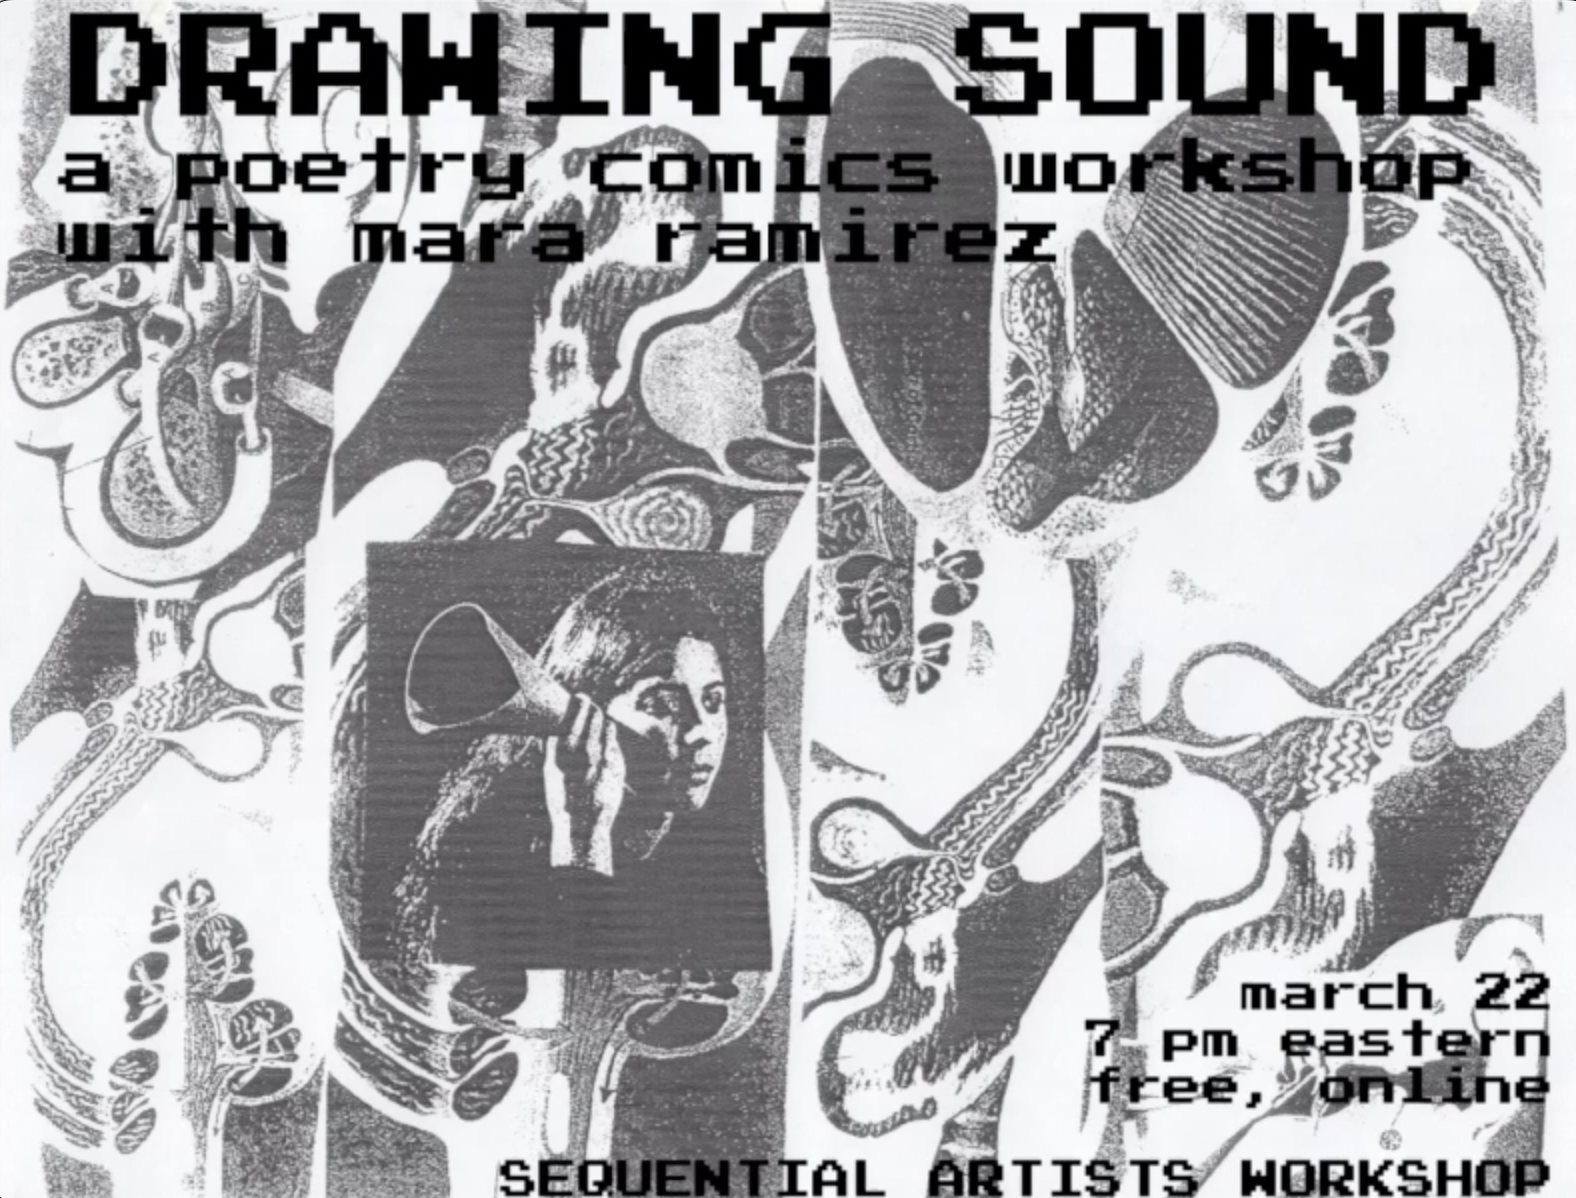 Promo image for workshop reading: â€œDrawing Sound / a poetry comics workshop with mara ramirez / march 22 / 7 pm eastern / free, online / Sequential Artists Workshop.â€ Decorated with a gray and white digital collage of photocopied x-rays of an ear, overlaid with a photocopied image of a woman holding an ear horn up to her right ear. 